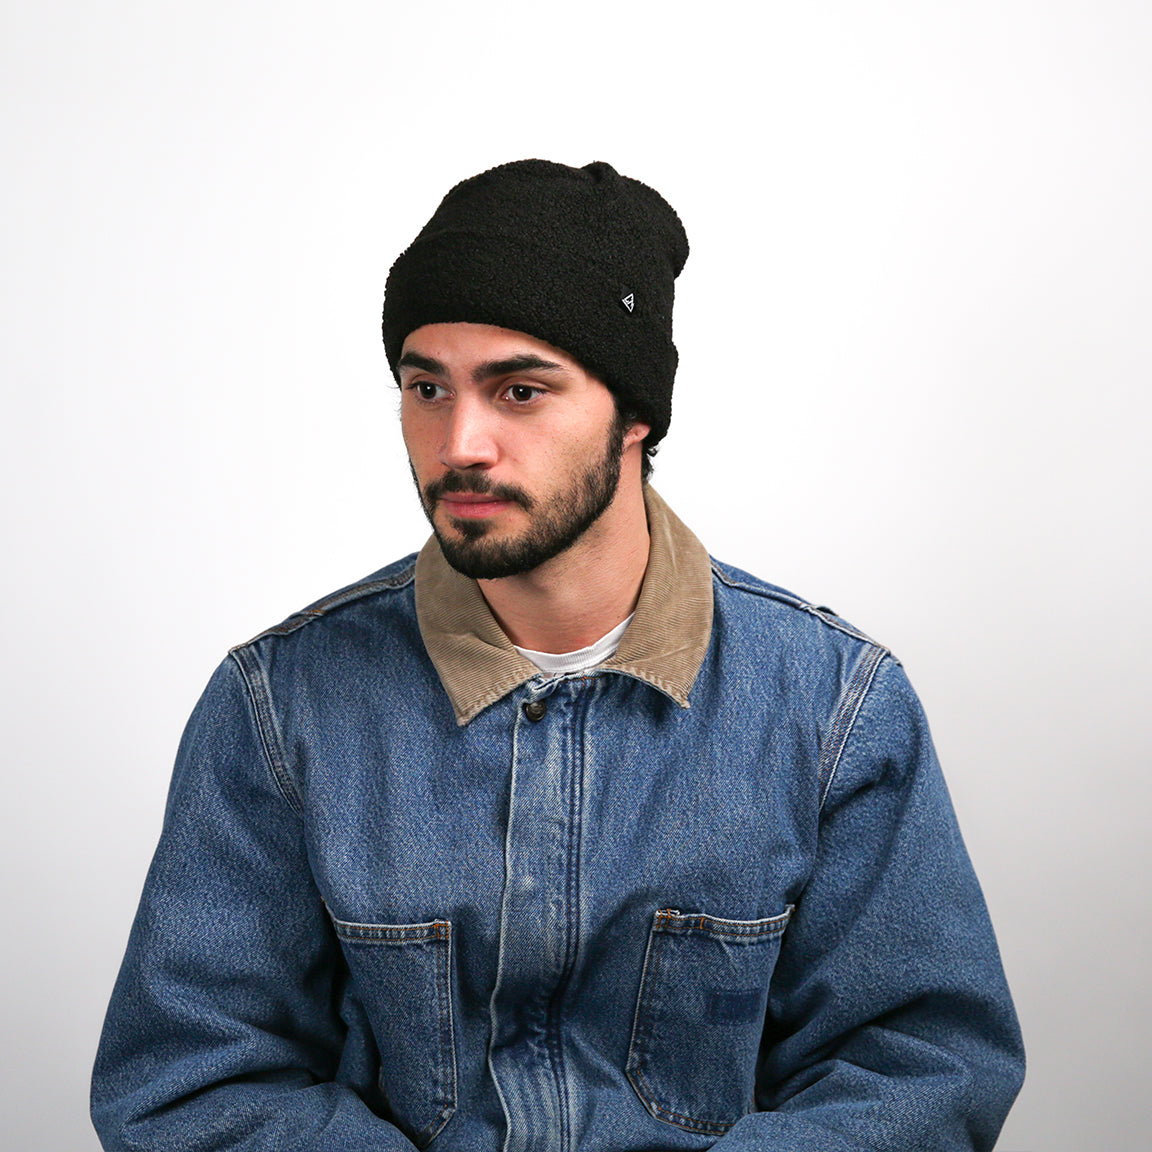 A person is wearing a black fleece beanie with a similar texture and rolled-up brim as the first. A small black triangular logo is attached near the edge. The beanie fits snugly around the head with a gentle slouch at the back. The denim jacket with the tan collar is again part of the attire.